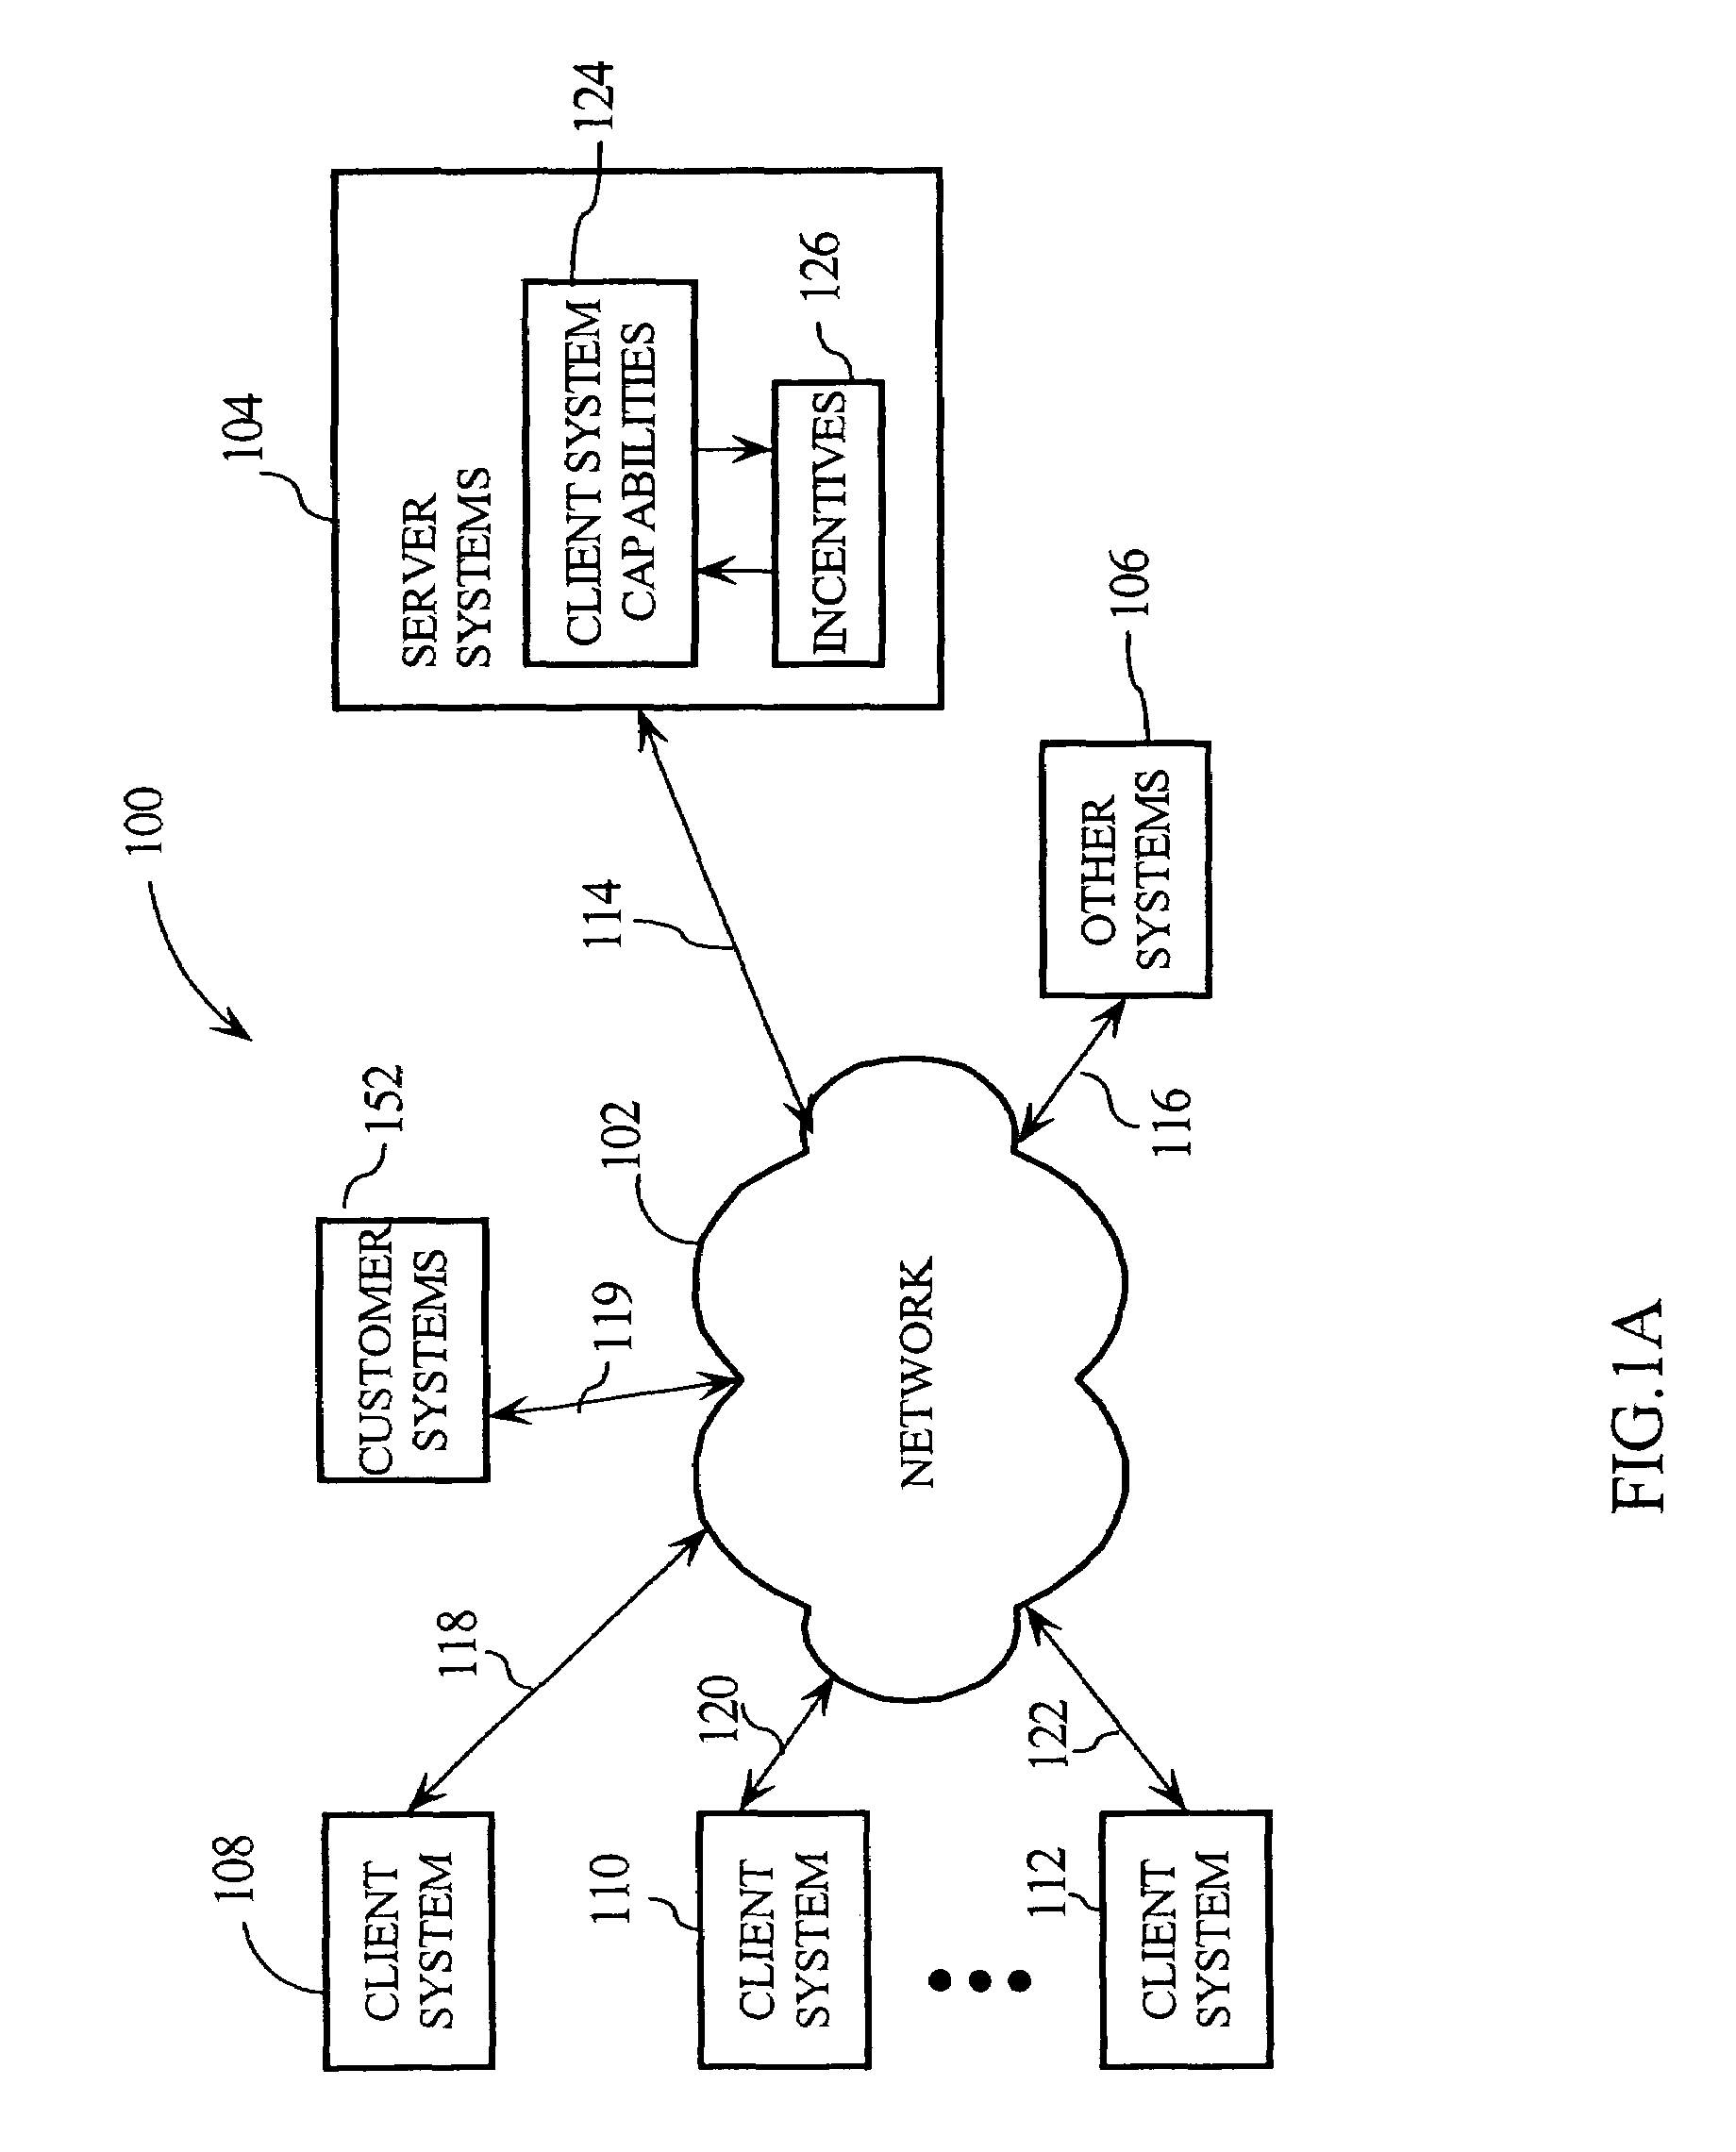 Data sharing and file distribution method and associated distributed processing system